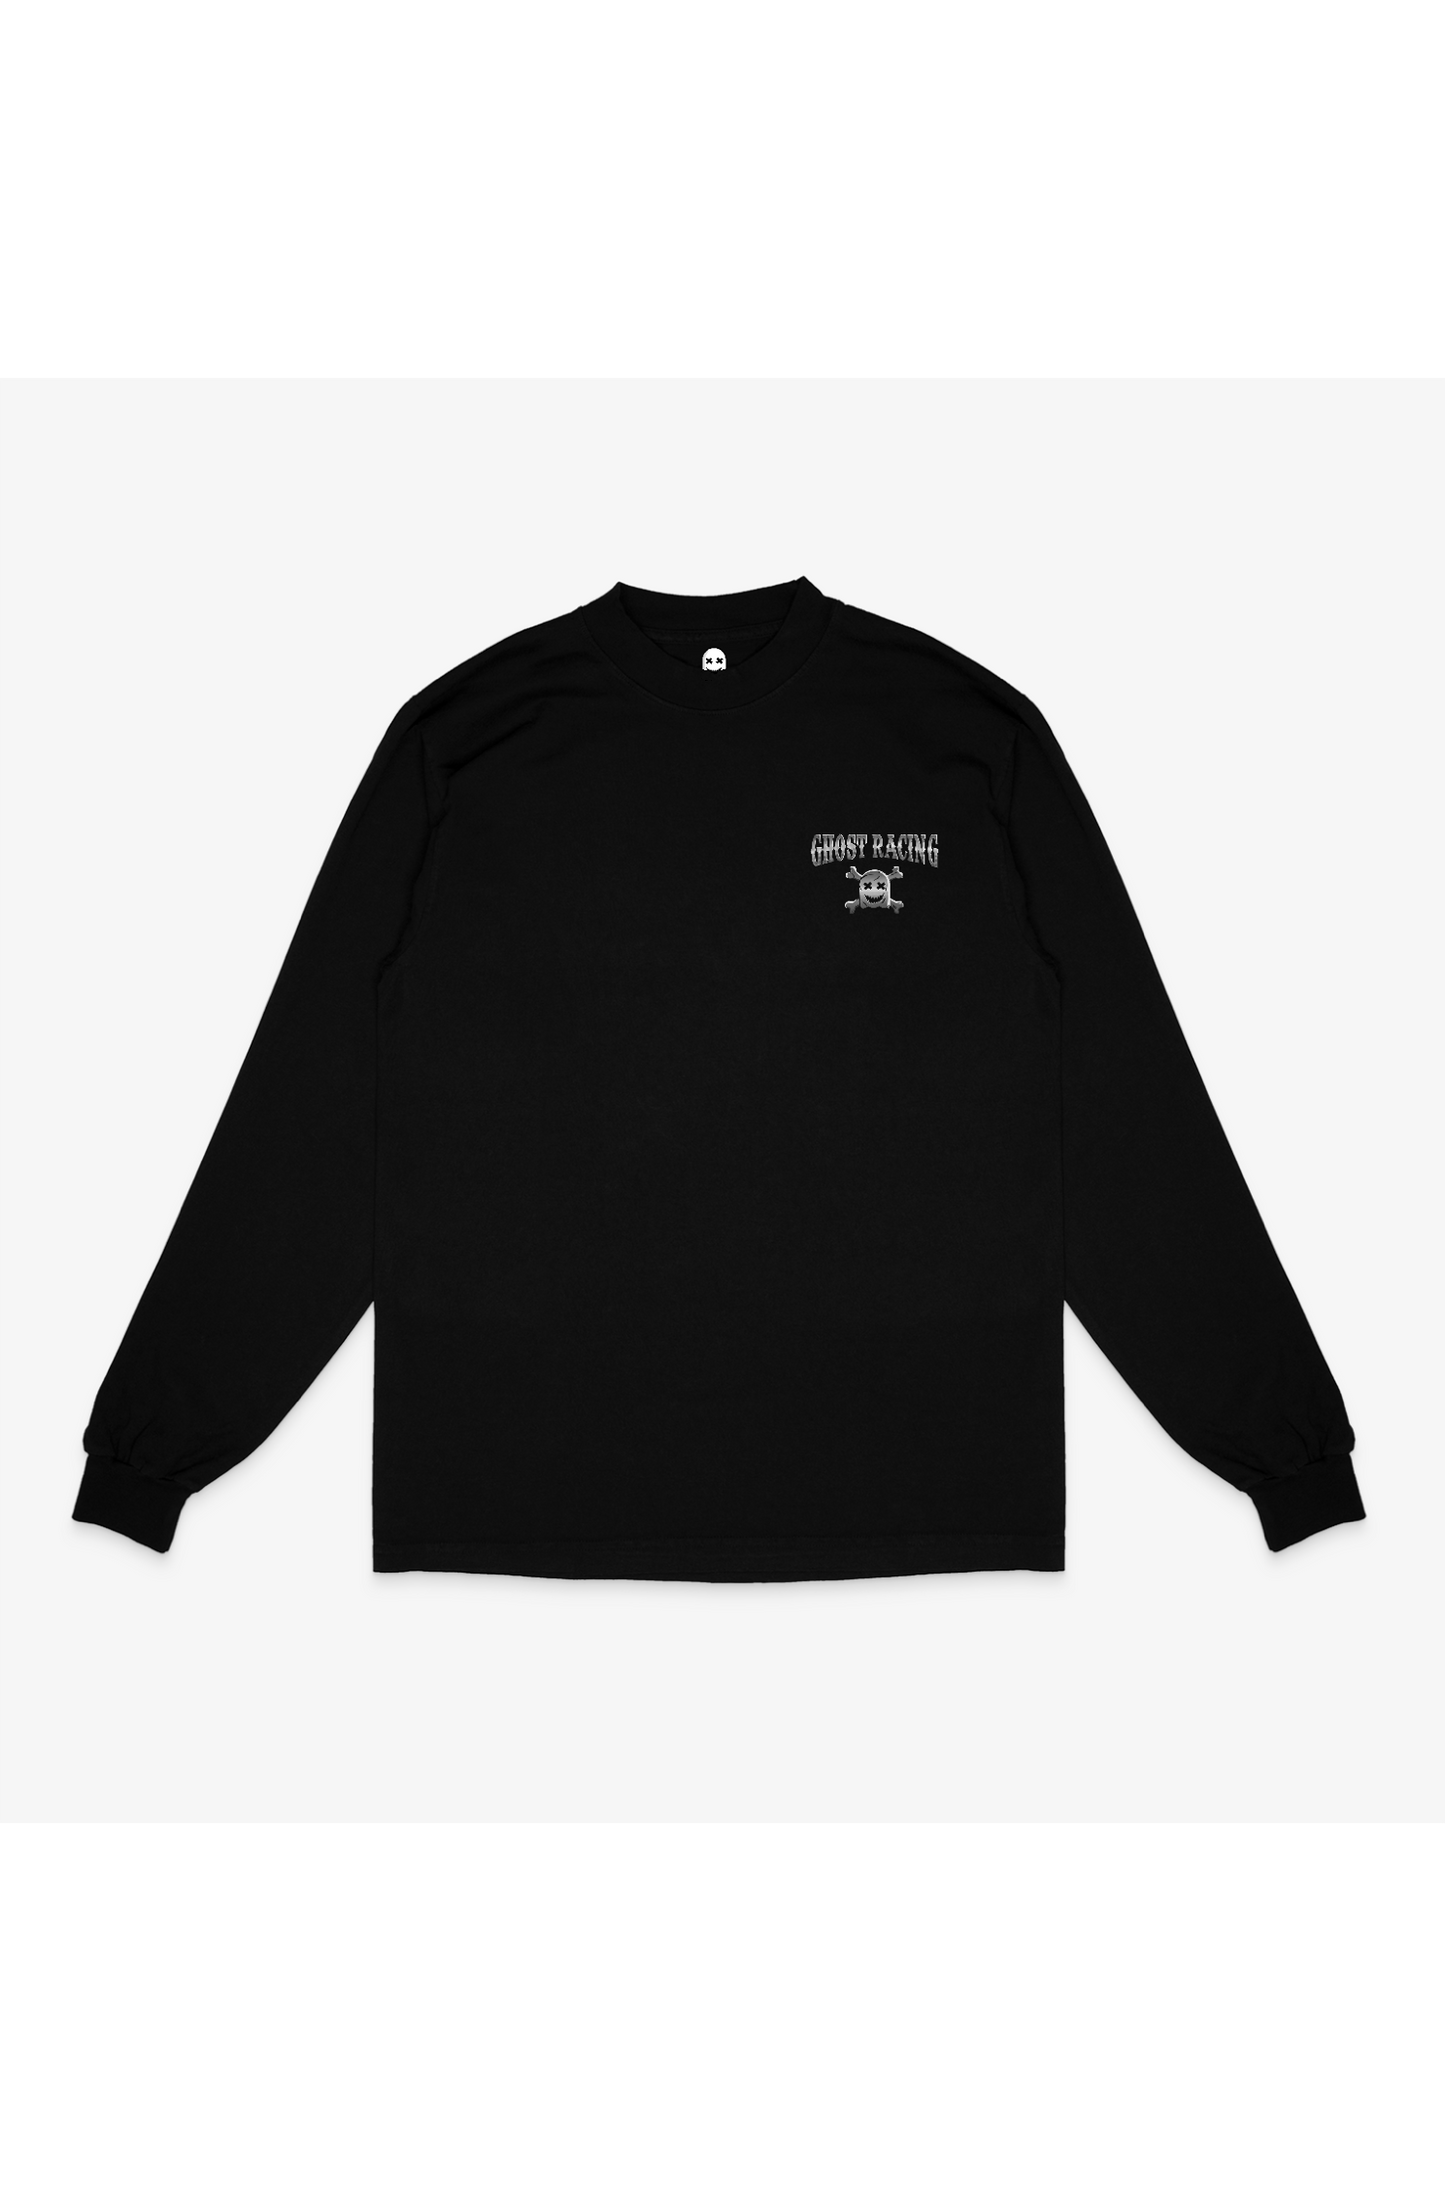 (PREORDER) DALLAS Most Wanted Long Sleeve - Black